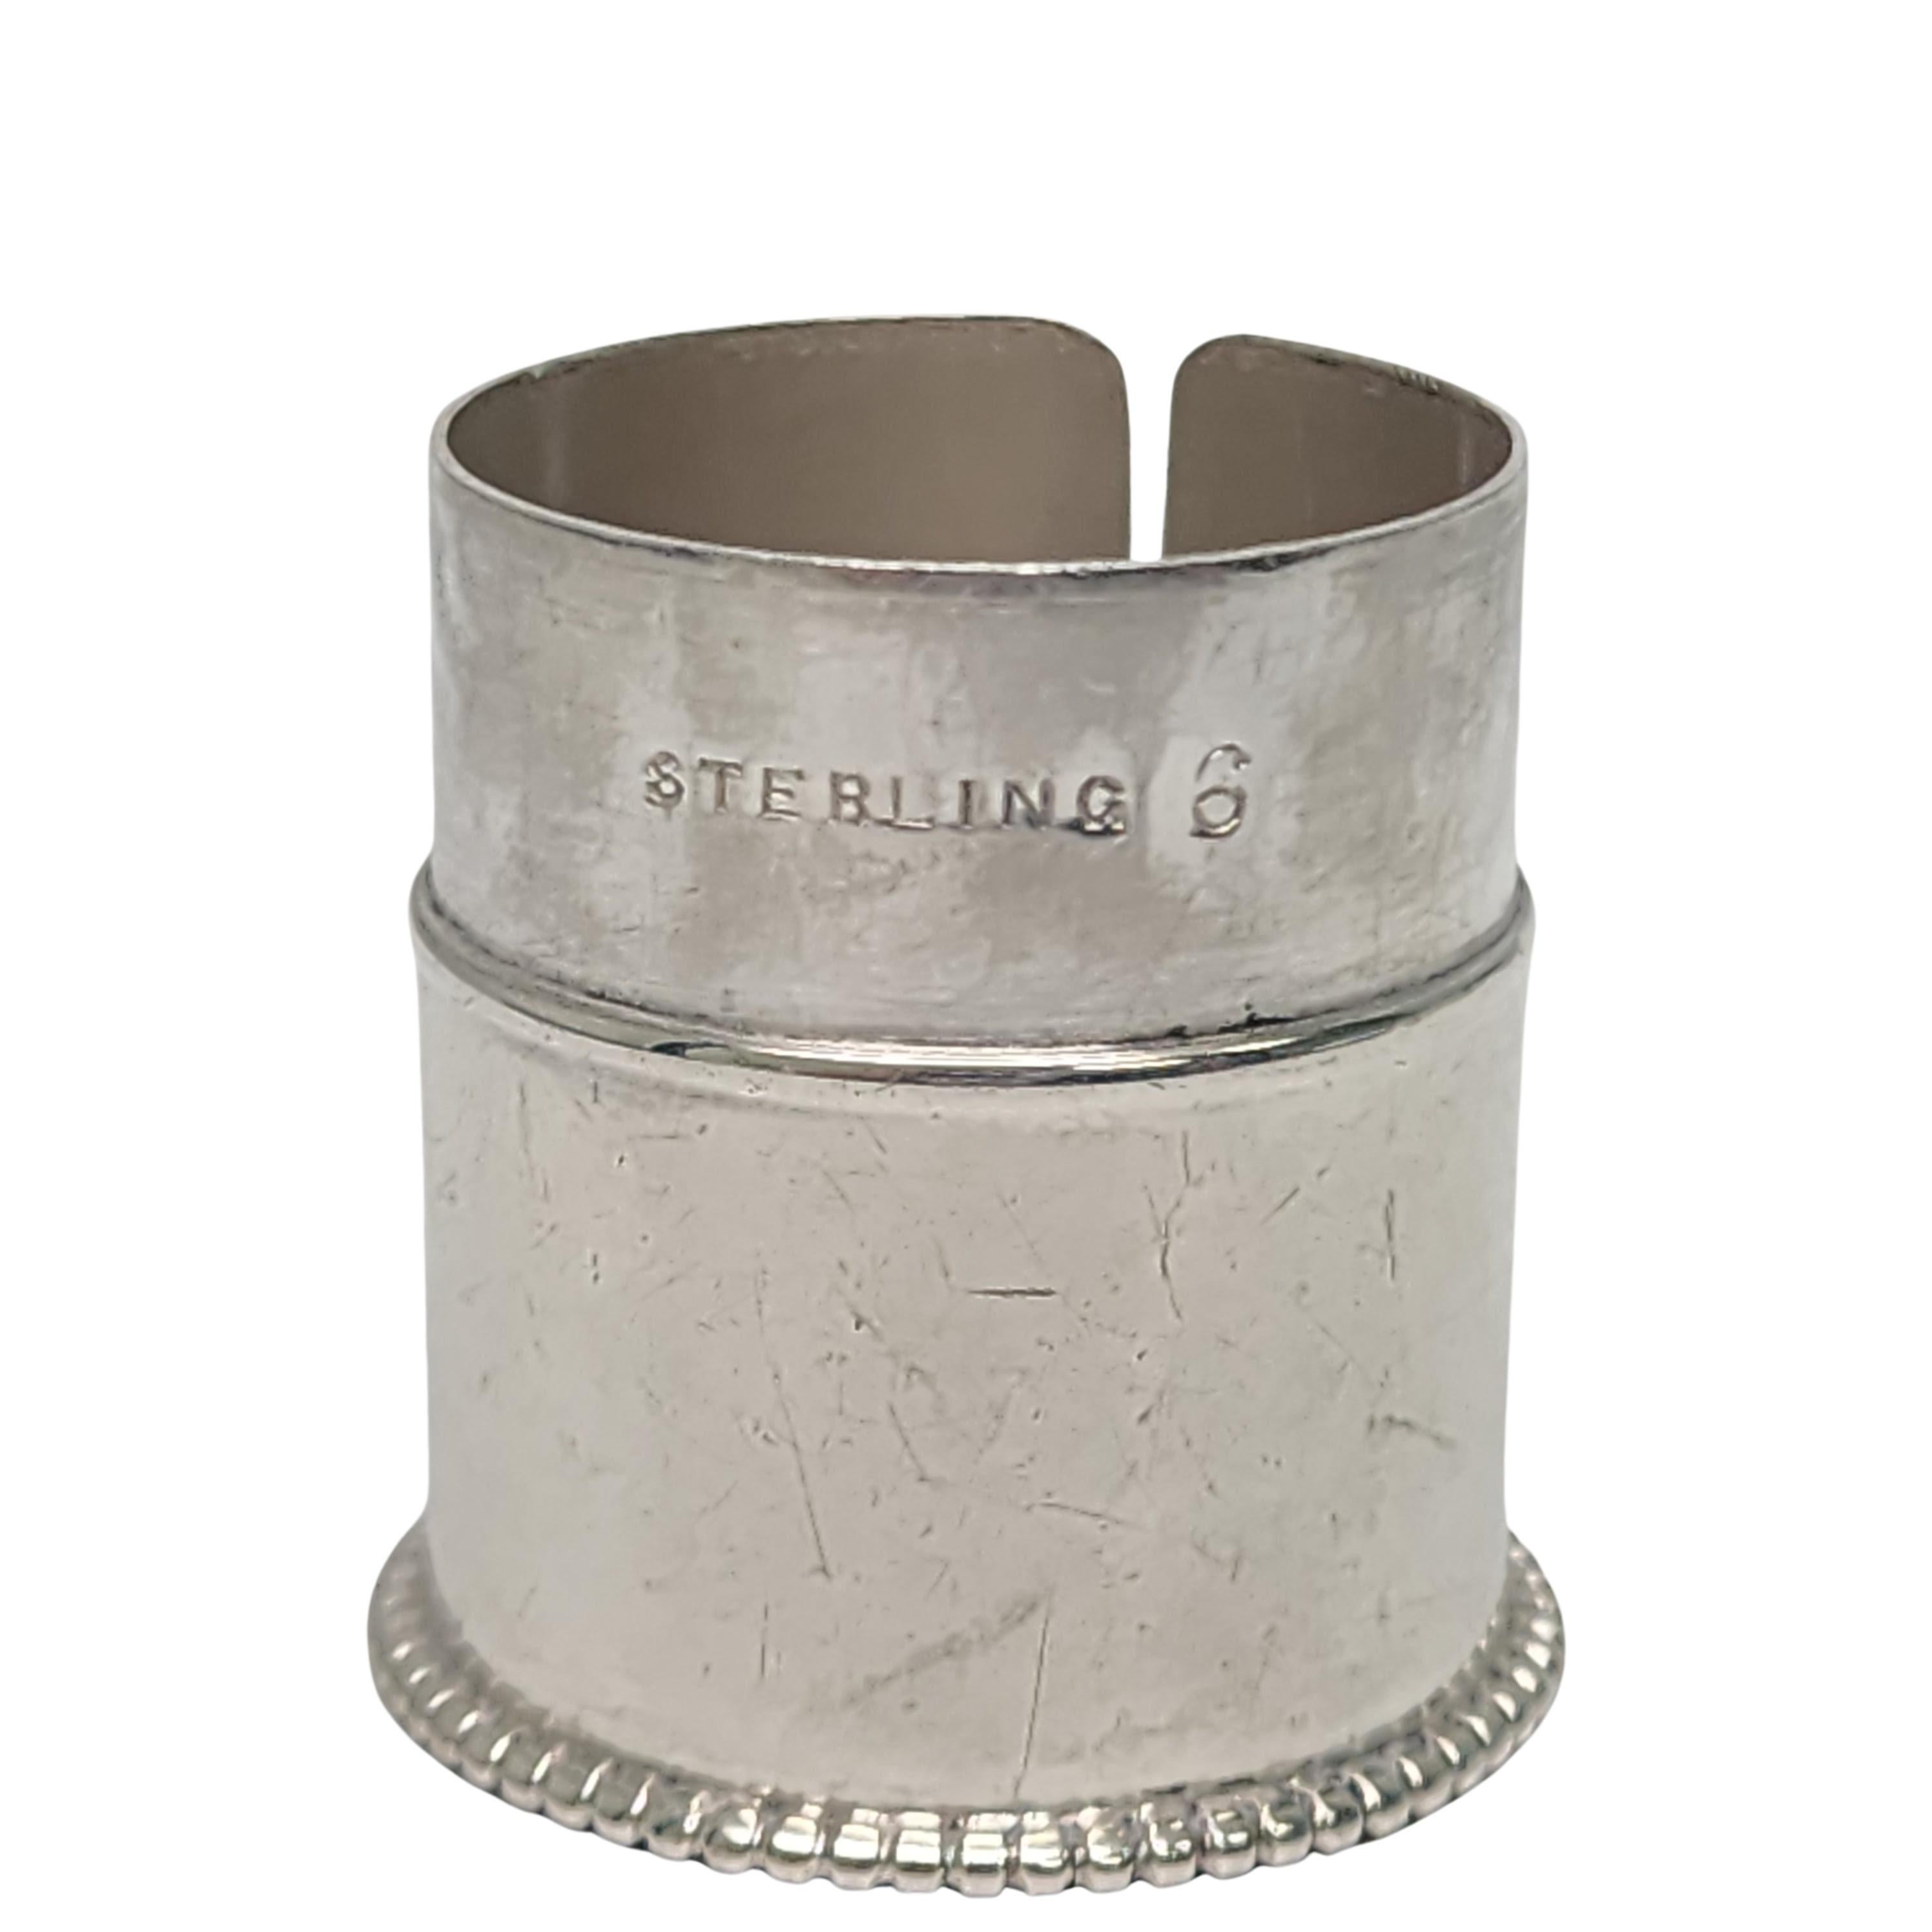 Antique Sterling Silver Thread Case with Monogram #16524 For Sale 5